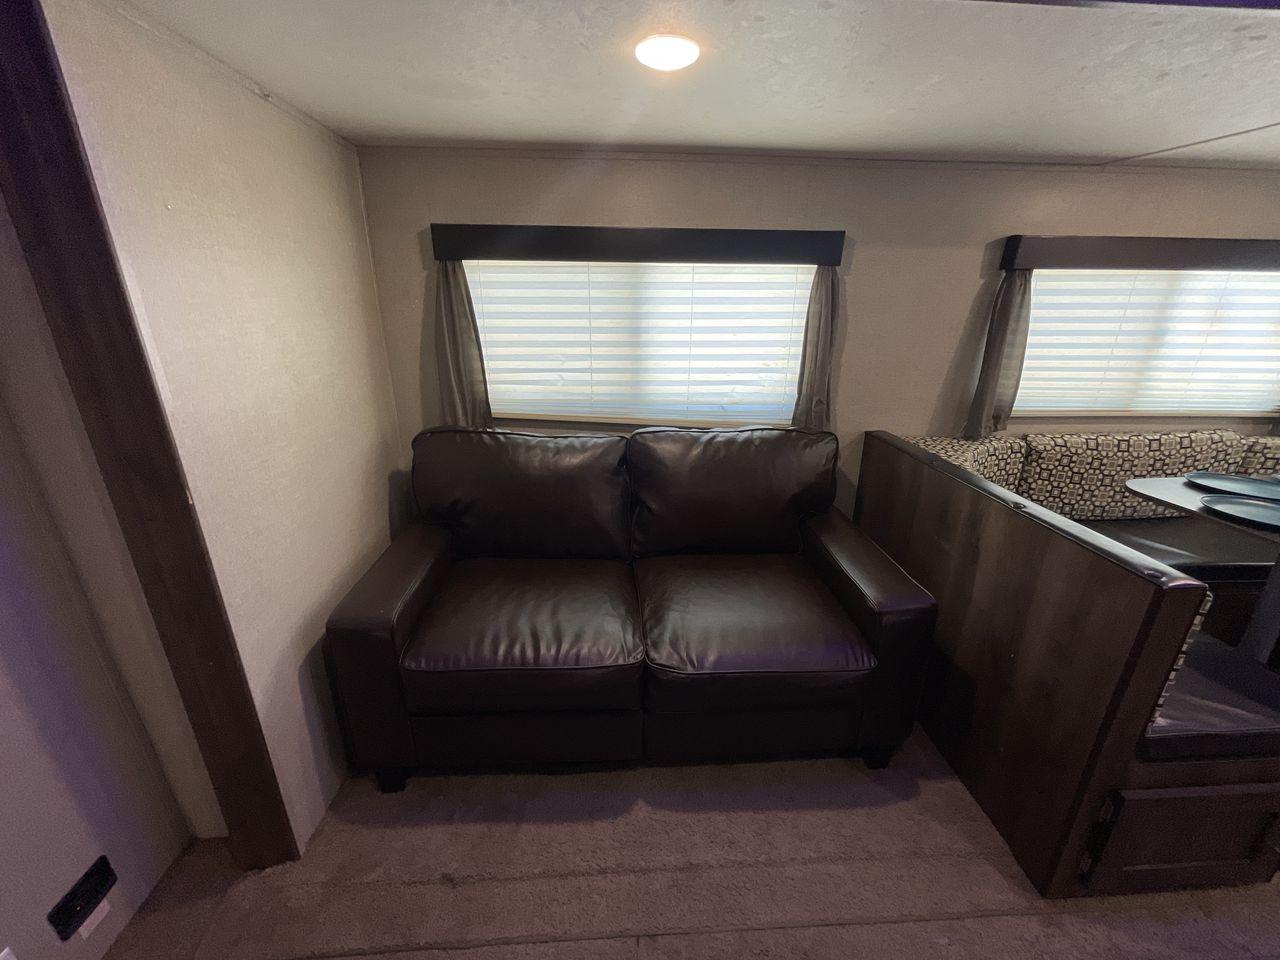 2019 TAN FOREST RIVER SHASTA 28BH (5ZT2SSTB4KE) , Length: 33.67 ft. | Slides: 1 transmission, located at 4319 N Main St, Cleburne, TX, 76033, (817) 678-5133, 32.385960, -97.391212 - Are you looking for the perfect travel trailer to explore the local driving highlights around Cleburne, TX? Look no further than this 2019 FOREST RIVER SHASTA 28BH, available for sale at RV Depot in Cleburne, TX. With its affordable price of $32,995, this travel trailer is perfect for those seeking - Photo #12